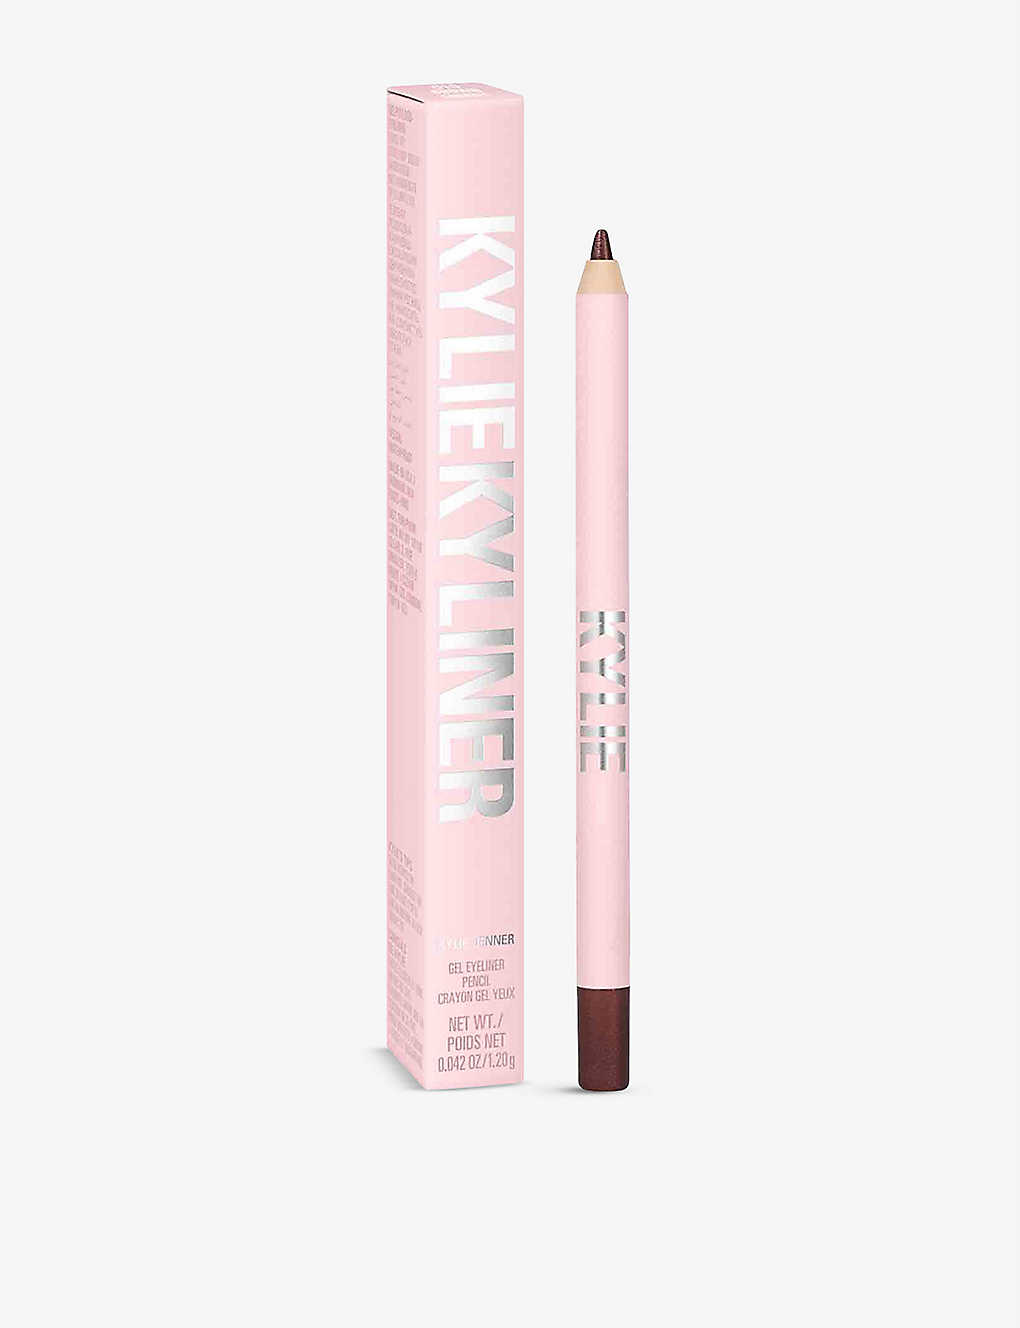 Kylie By Kylie Jenner Kyliner Gel Pencil 4.25g In 010 Shimmery Brown